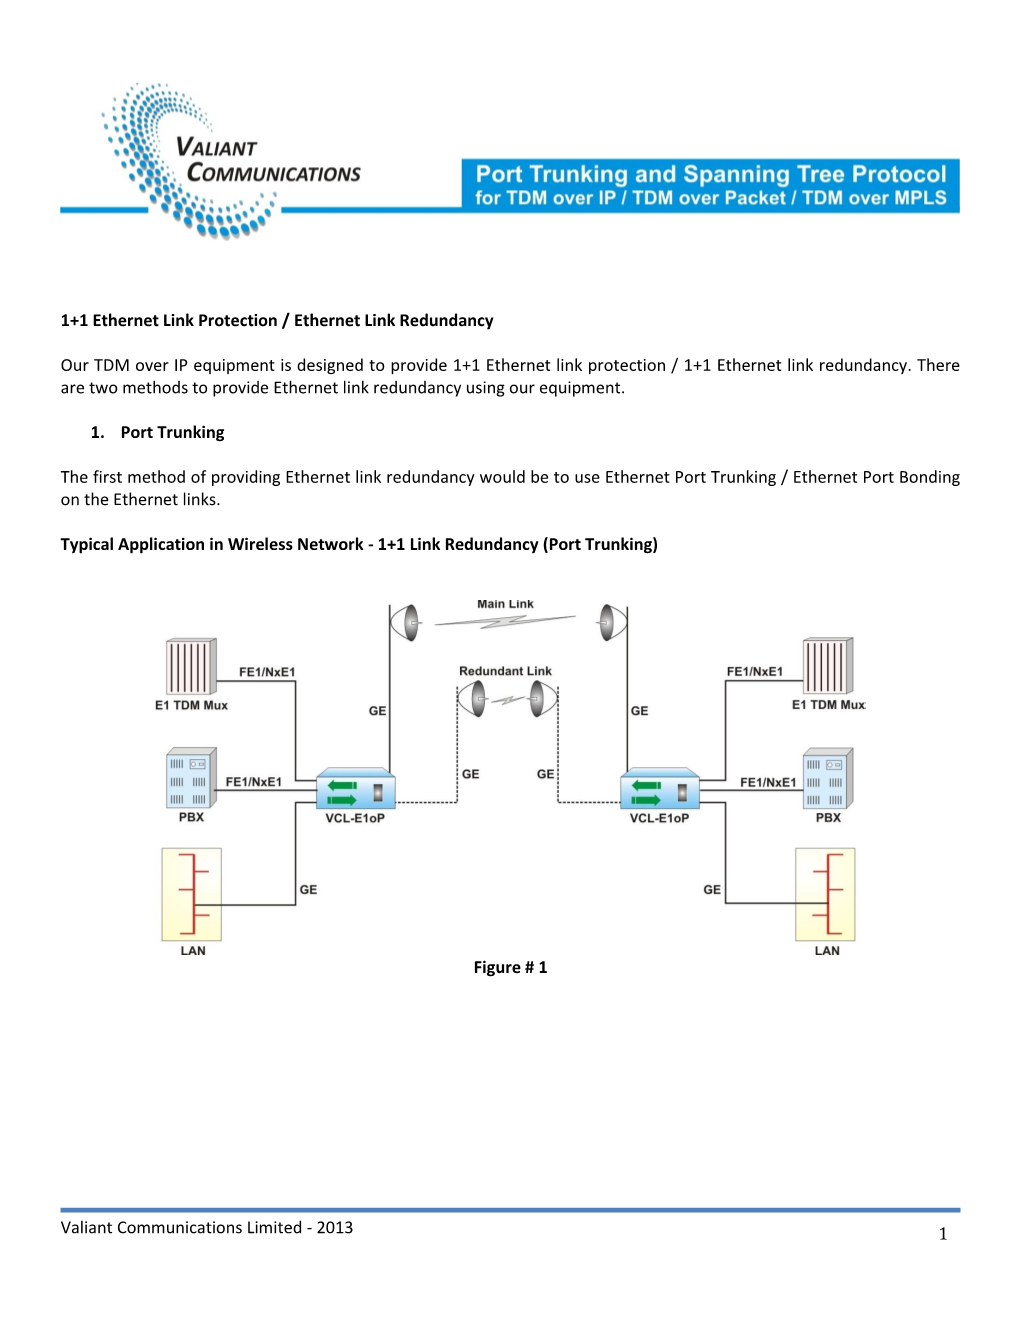 Port Trunking and Spanning Tree Protocol